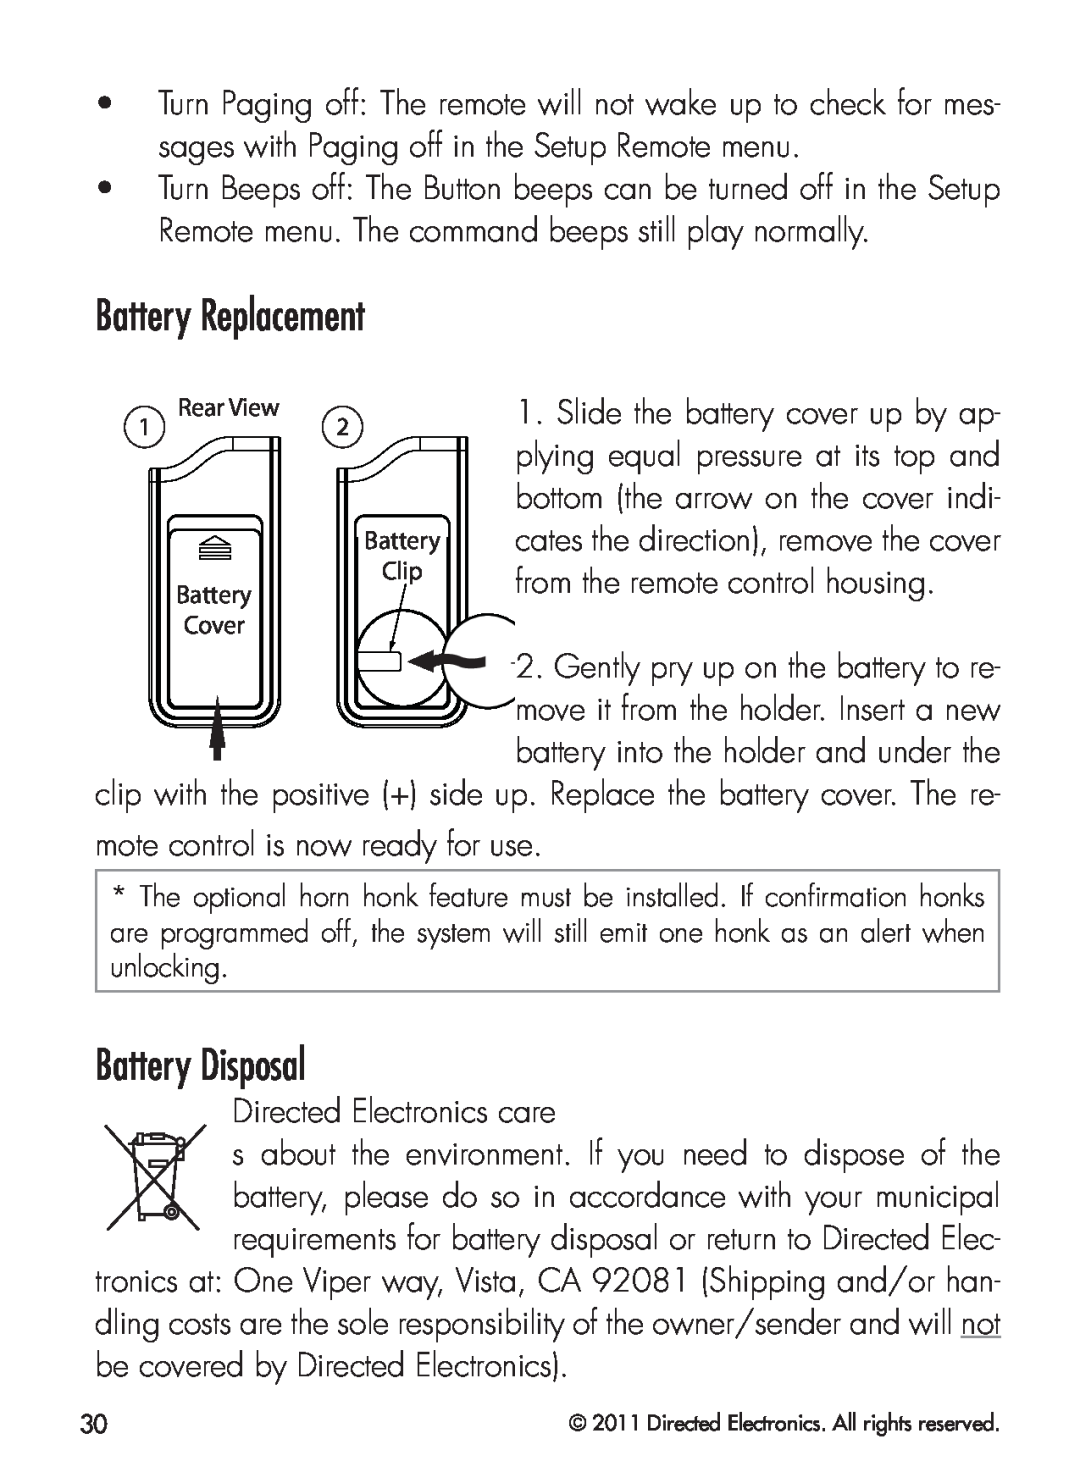 Python 424 manual Battery Replacement, Battery Disposal 